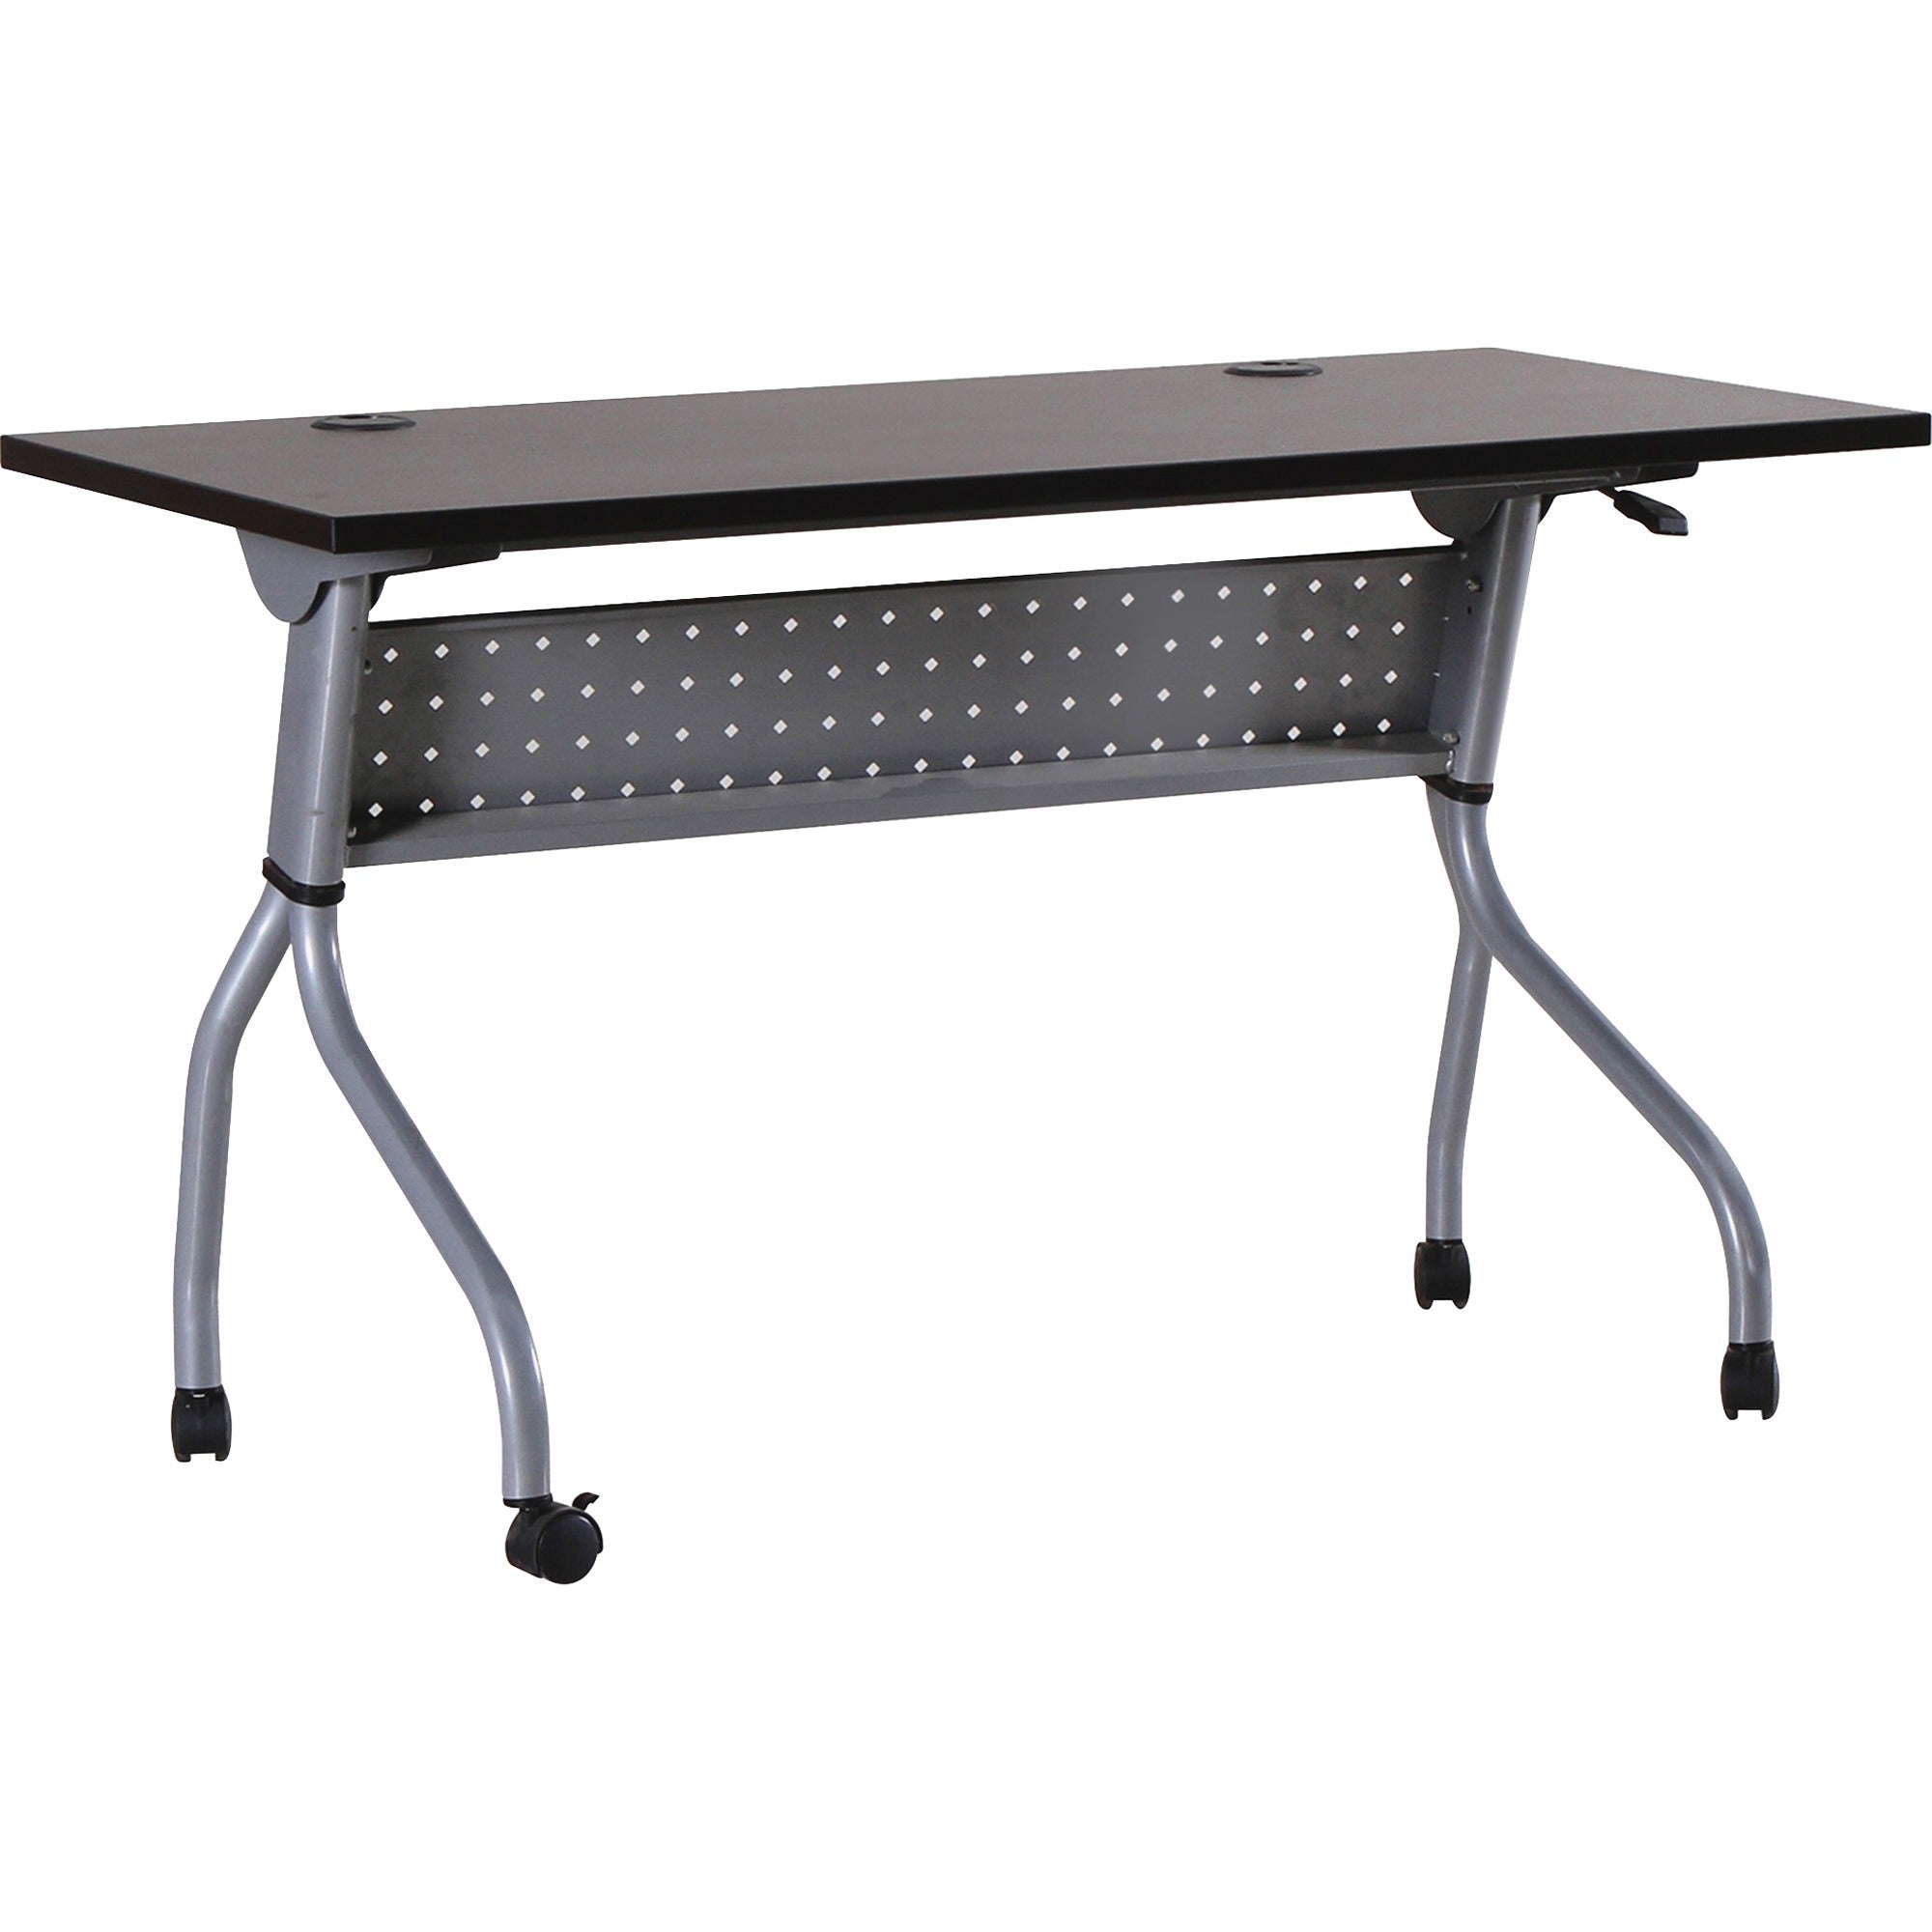 Lorell Flip Top Training Table - For - Table TopRectangle Top - Four Leg Base - 4 Legs x 48" Table Top Width x 23.50" Table Top Depth - 29.50" Height x 47.25" Width x 23.63" Depth - Assembly Required - Espresso, Silver - Melamine, Nylon - 1 Each - 